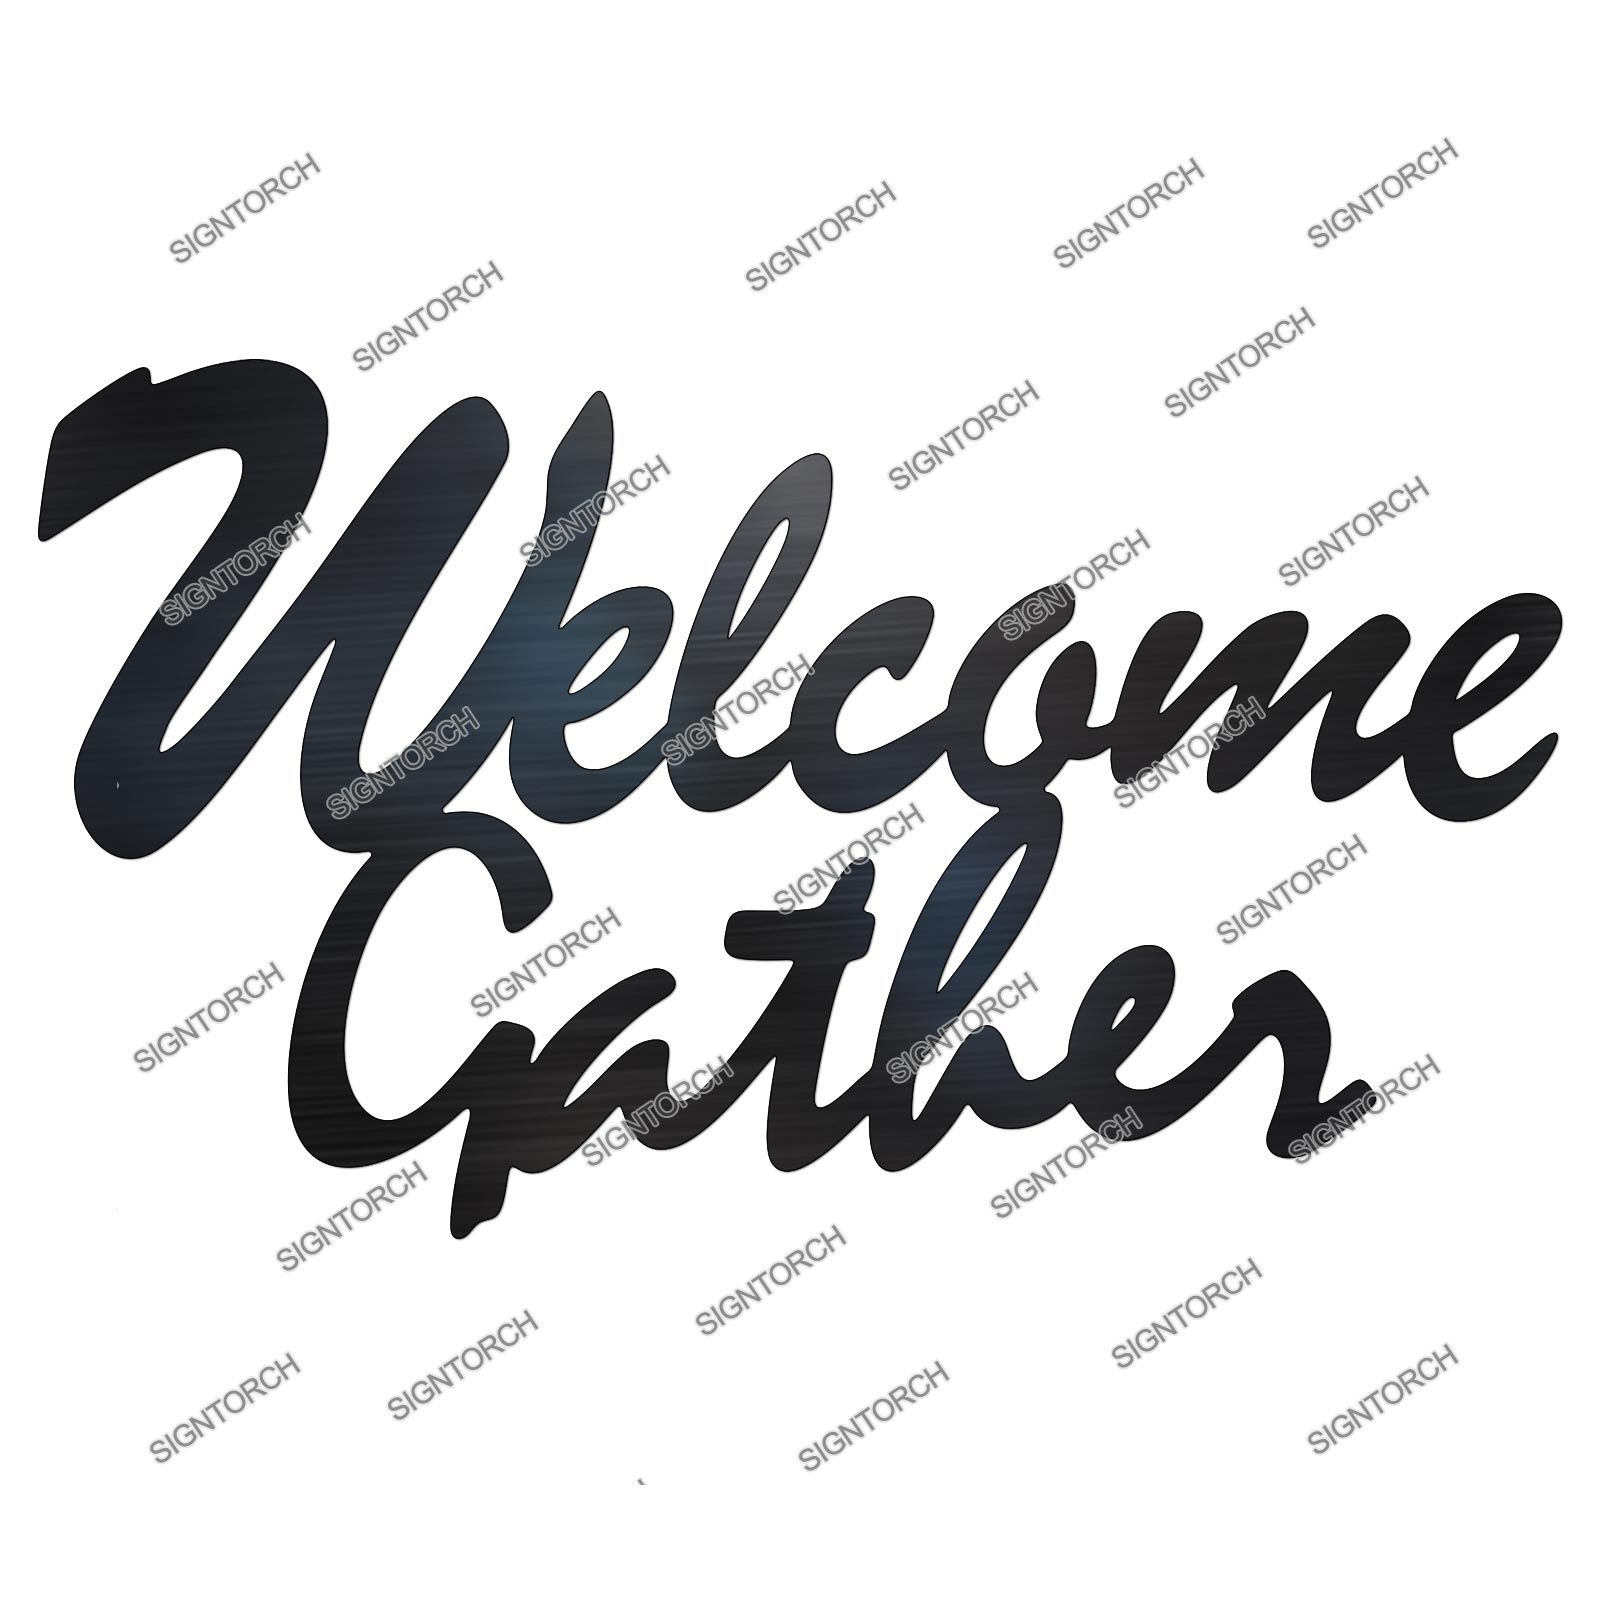 welcome_gather3989f.